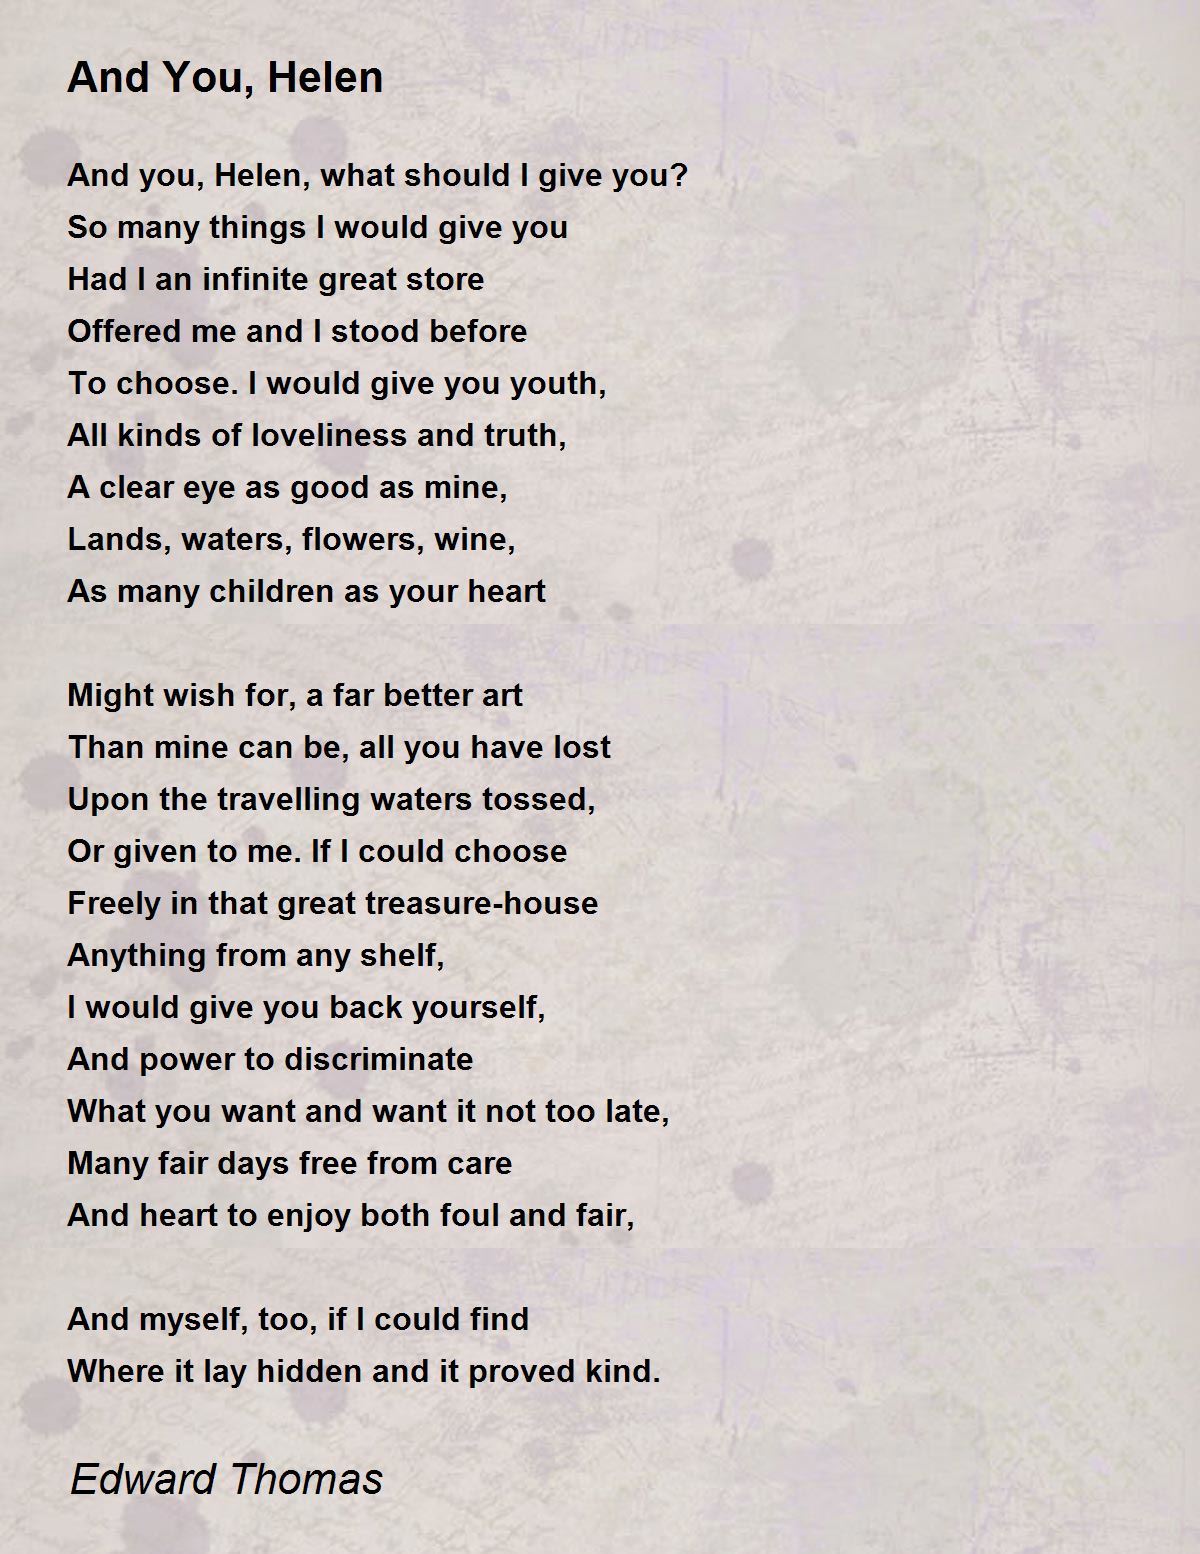 example of ballad poem about love